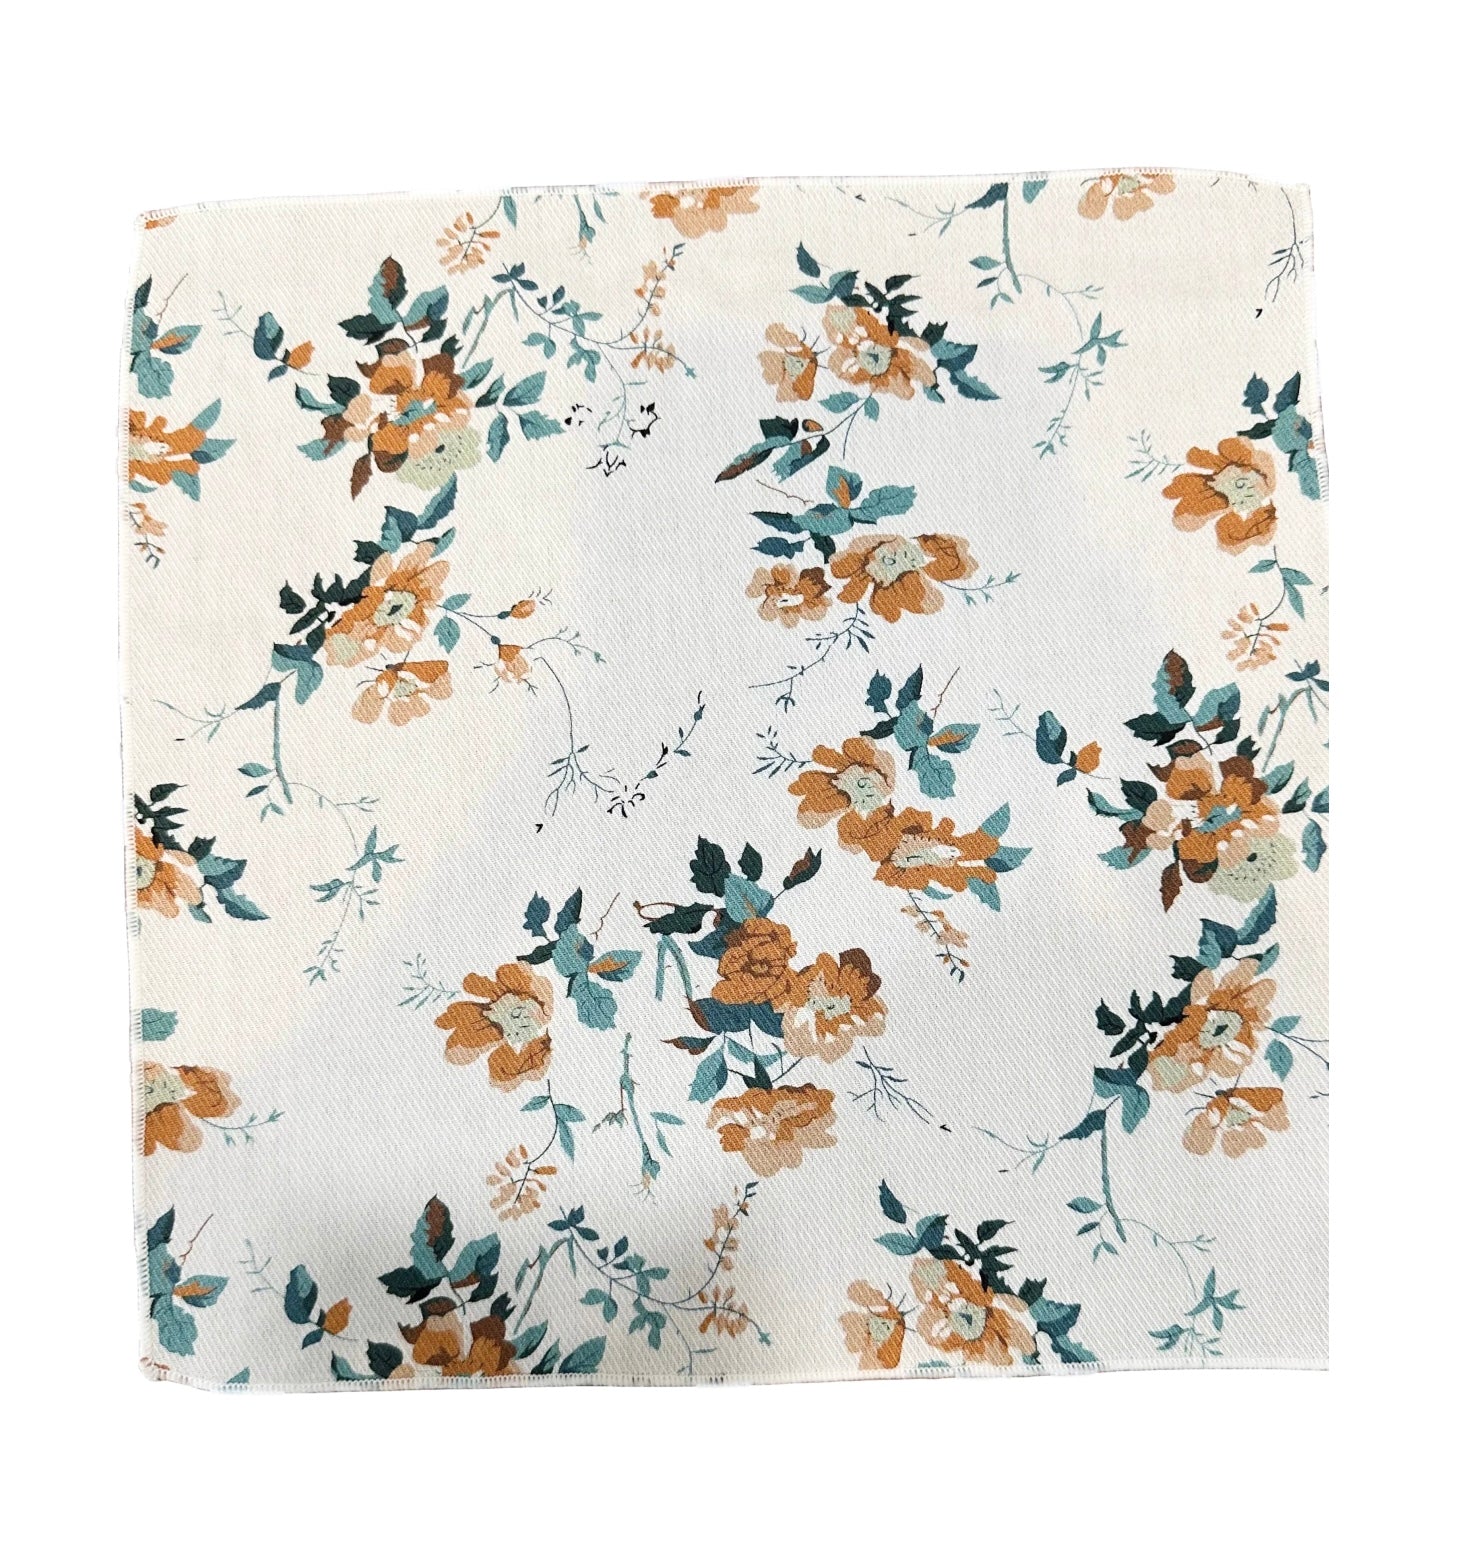 White Floral Pocket Square KENNEDY - MYTIESHOP Mytieshop Gray and Green Floral Pocket Square Material CottonItem Length: 23 cm ( 9 inches)Item Width : 22 cm (8.6 inches) Color: Gray Great for: Groom Groomsmen Wedding Shoots Formal Prom Fancy Parties Gifts and presents